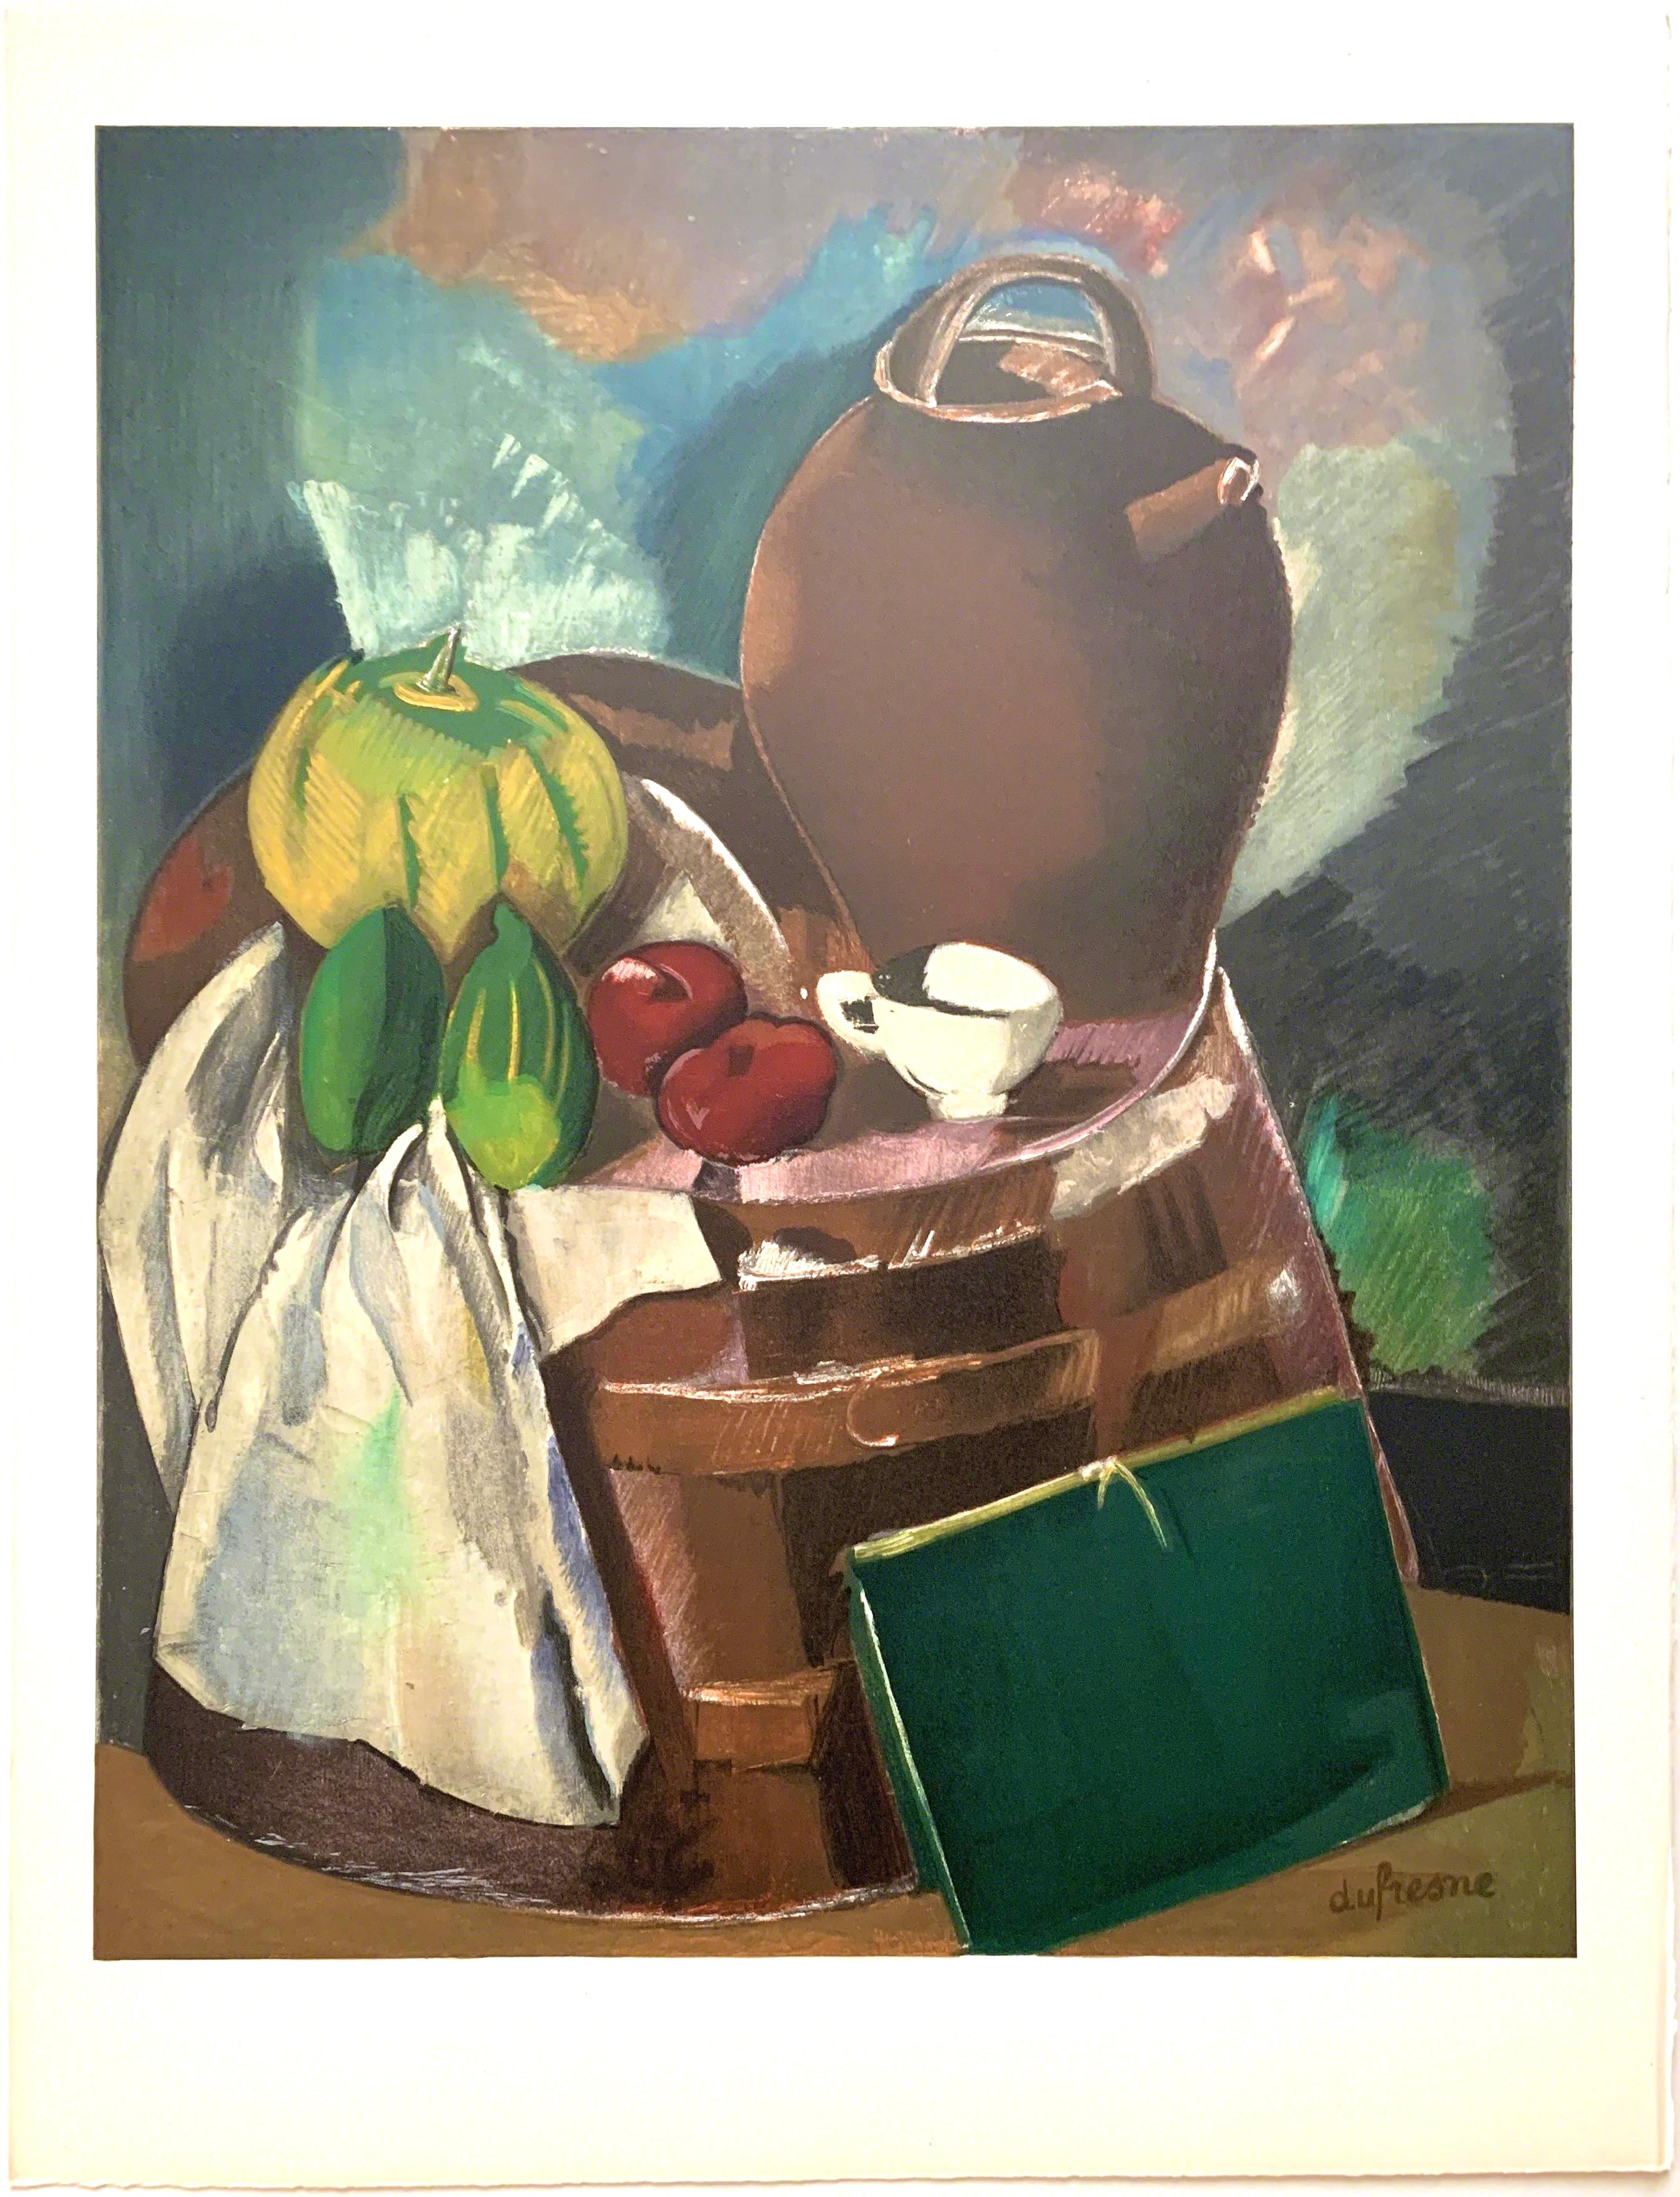 Dufresne, Nature morte, Dufresne, Collection Pierre Lévy (after) For Sale 3